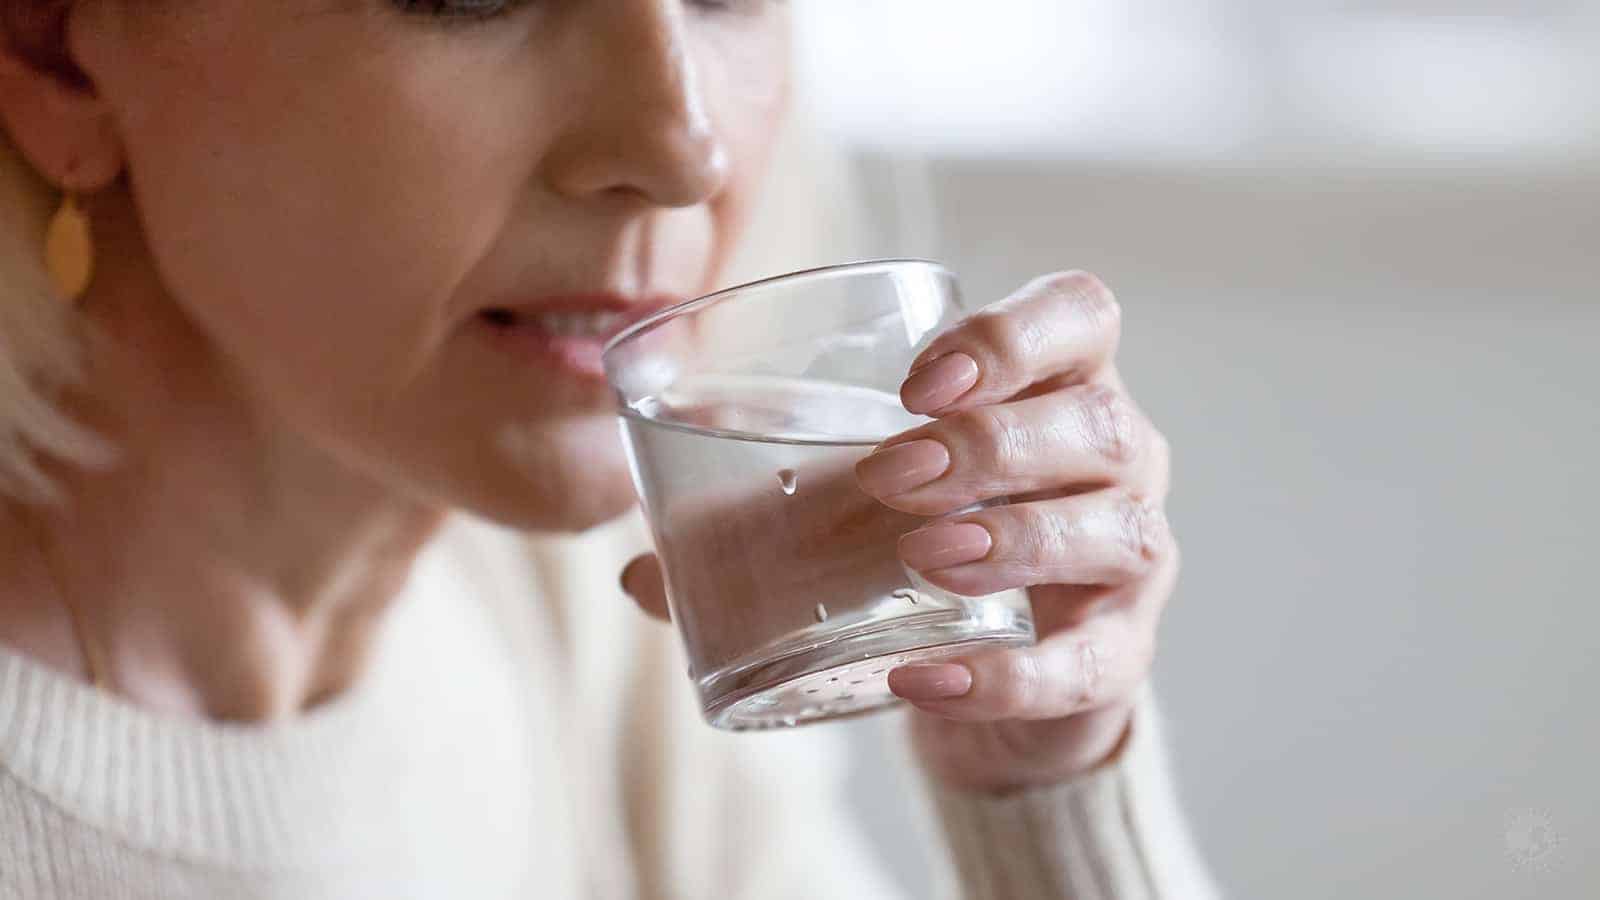 10 Health Problems That Make You Have Excessive Thirst